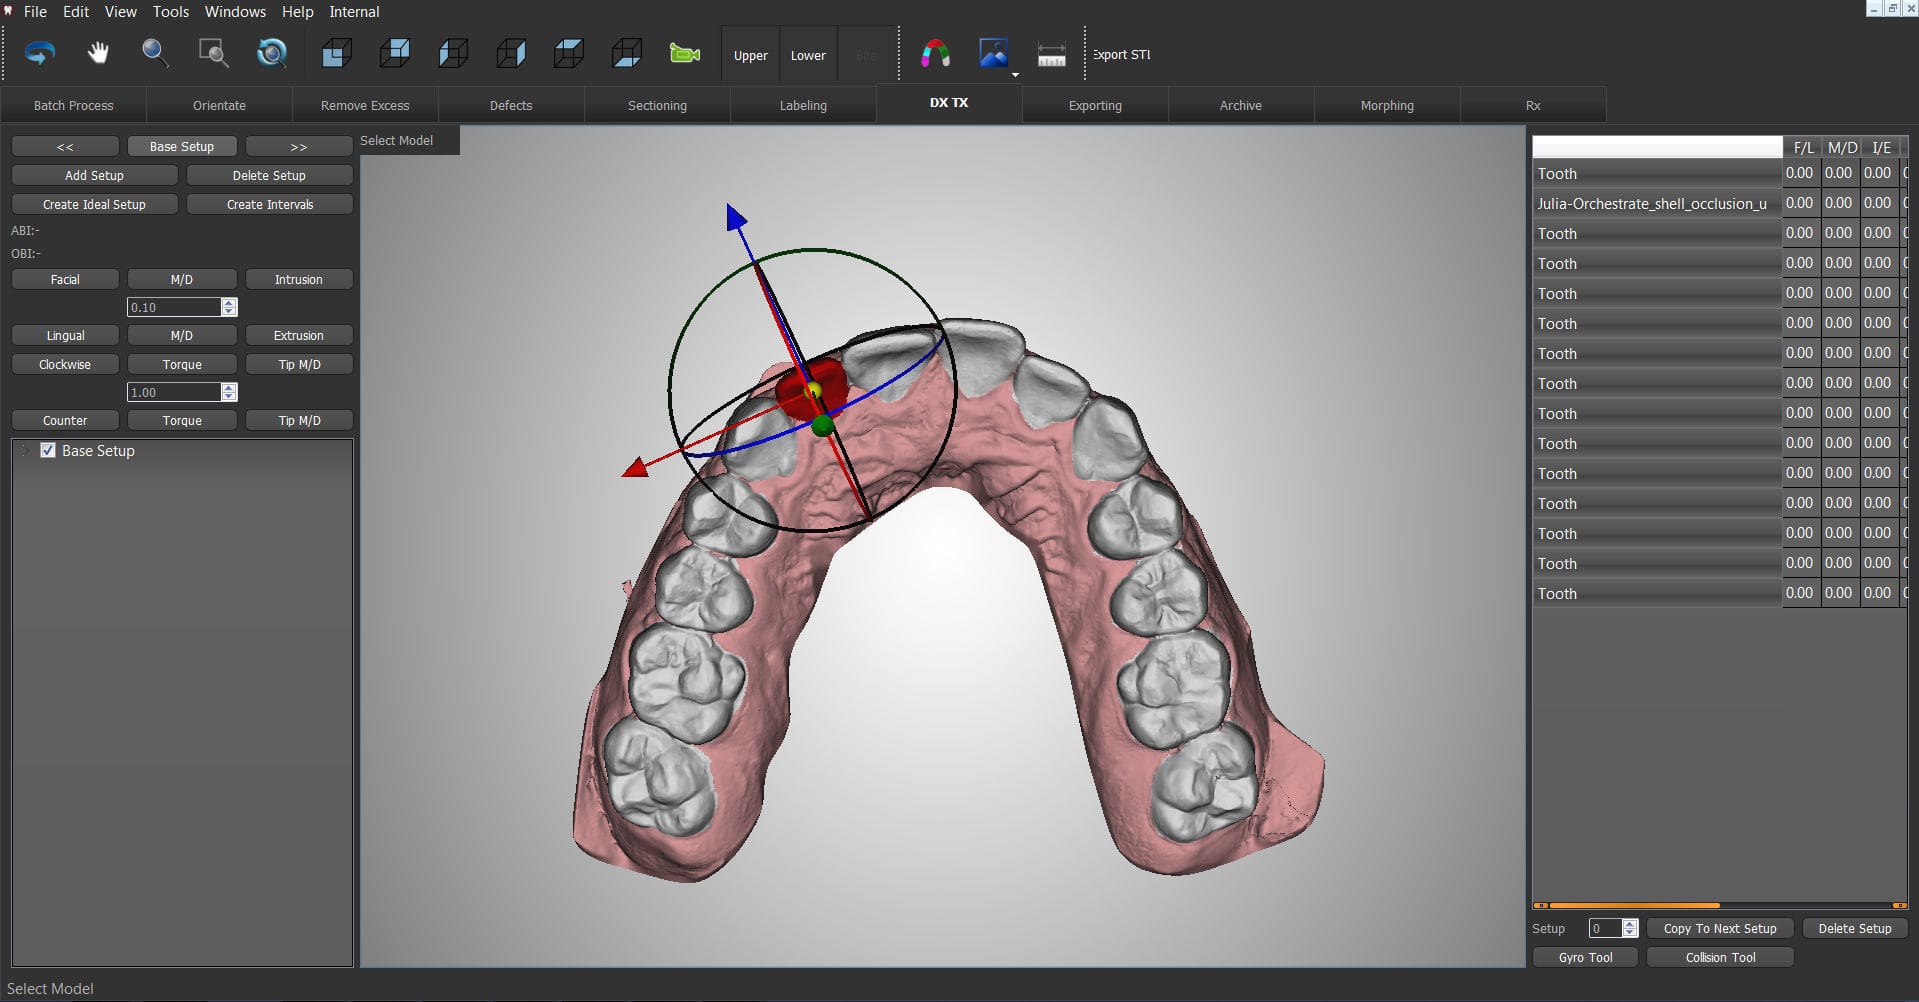 Orthodontic Software: What Is It Used For?